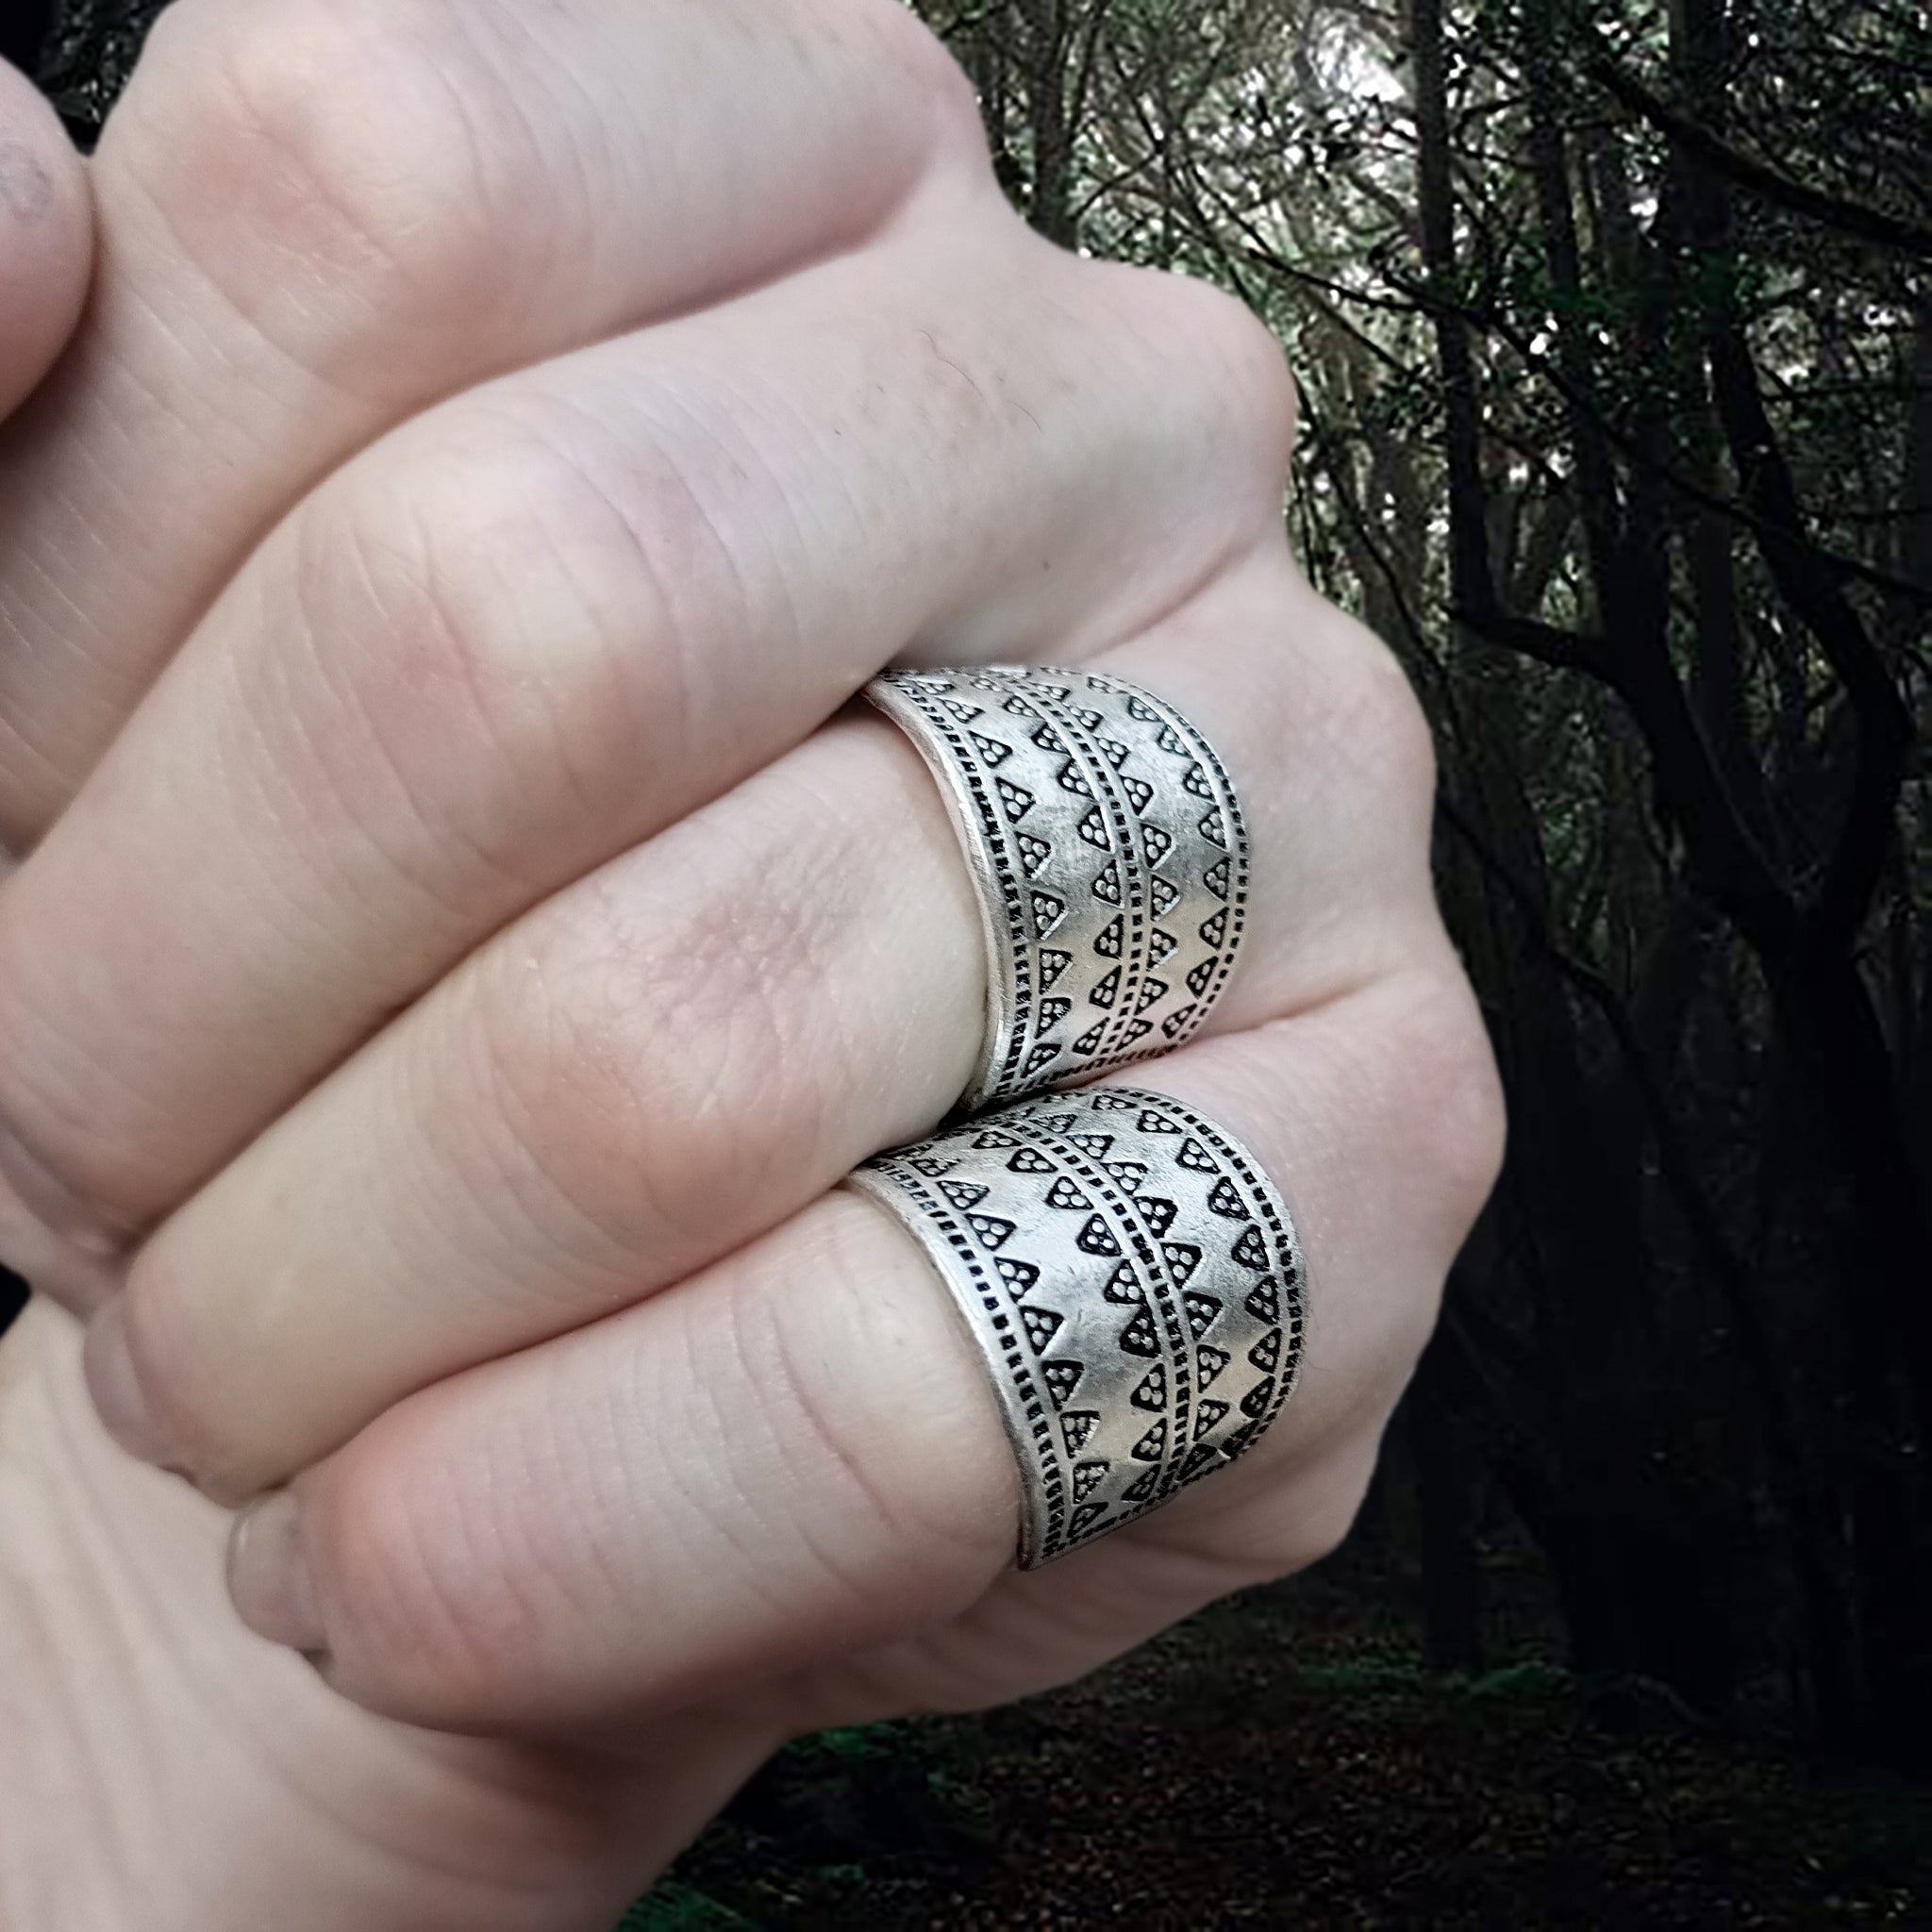 Embossed Silver Replica Viking Ring on Fingers